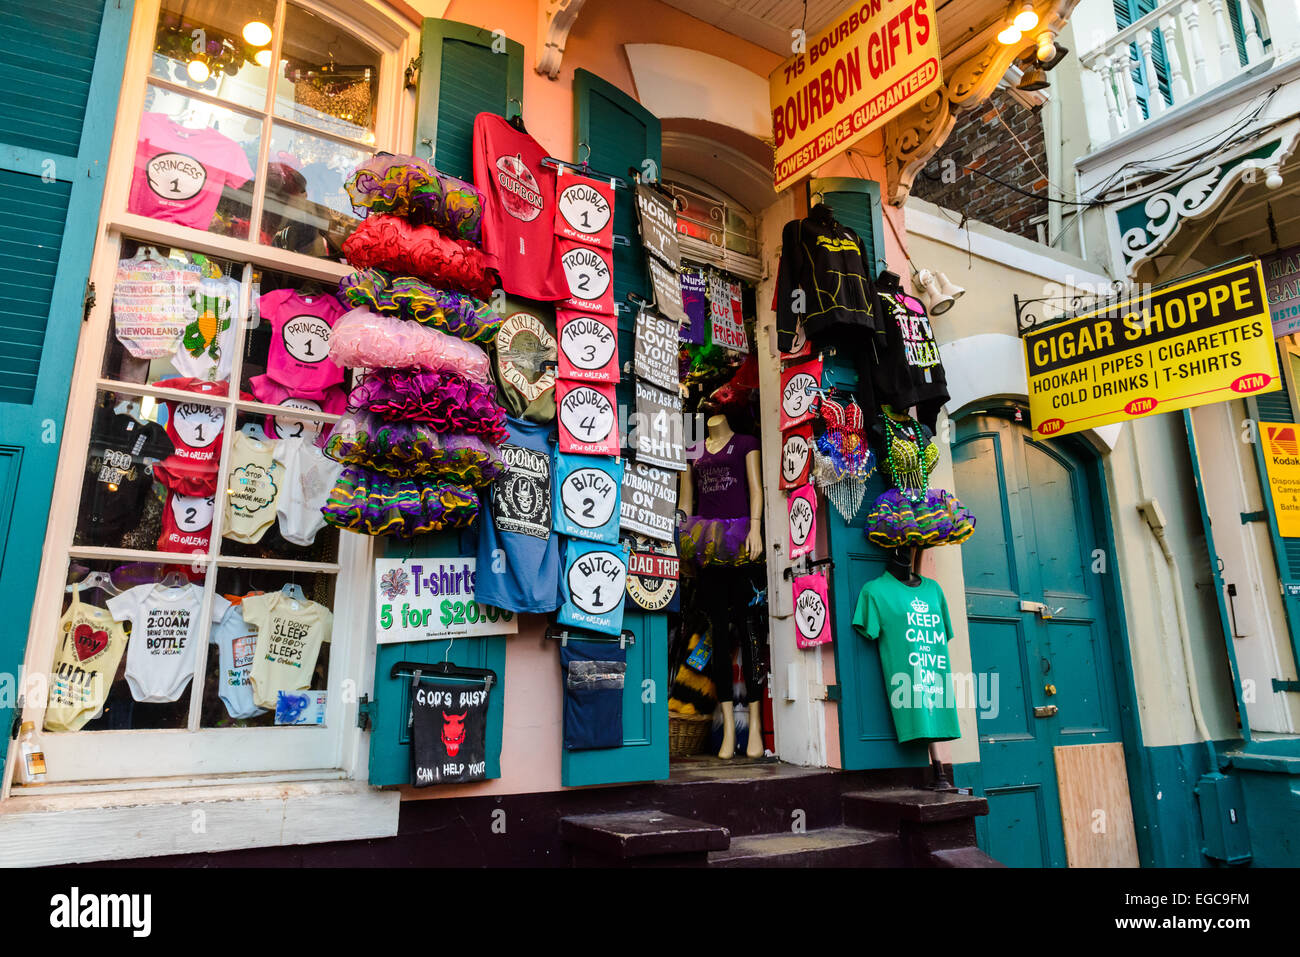 Gift shop at Bourbon street, New Orleans. Famous Bourbon street is a center of nightlife in New Orleans Stock Photo